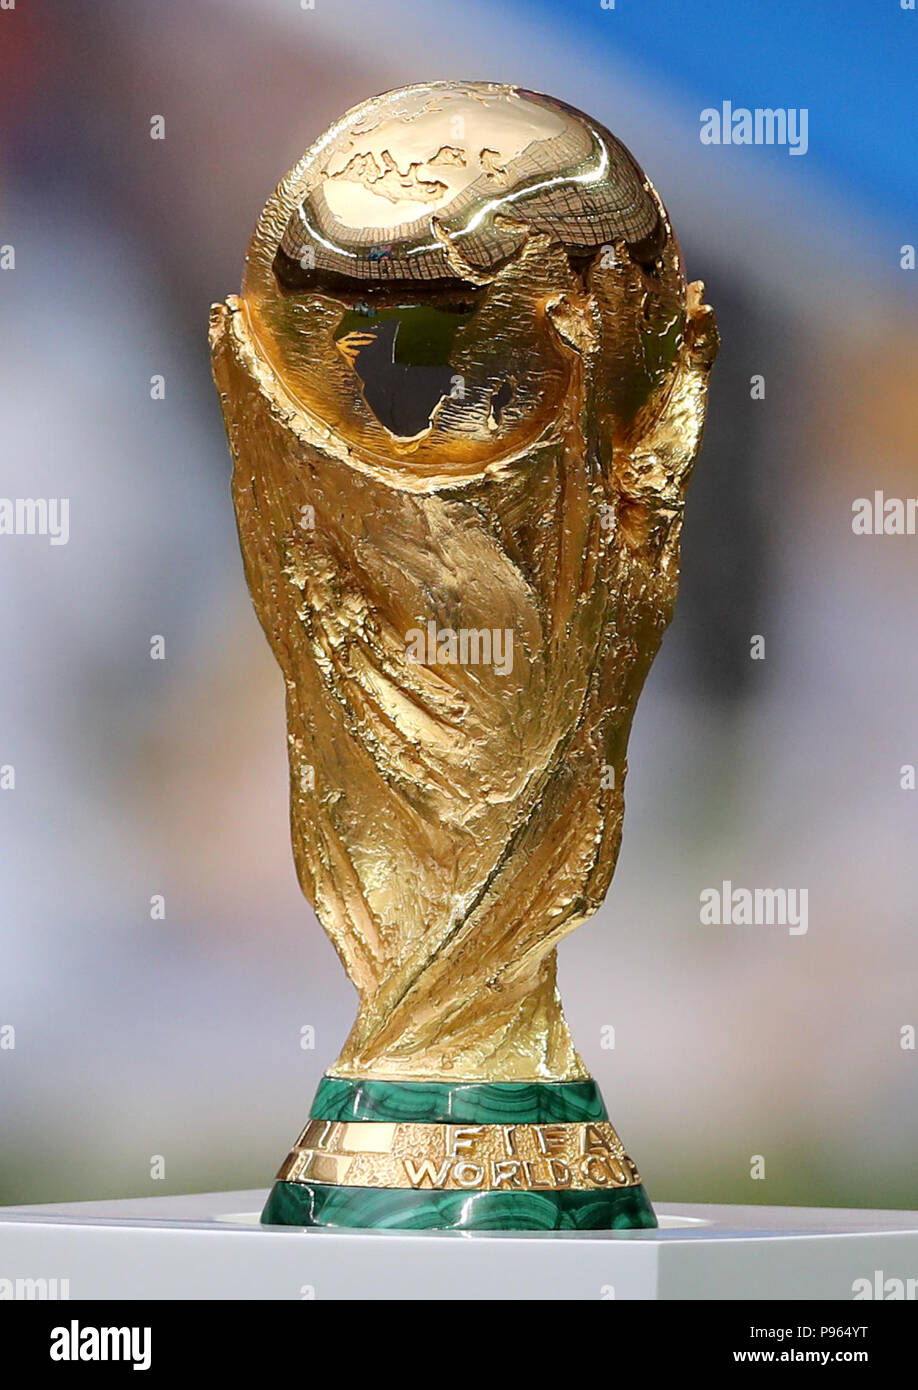 A general view of the official world cup trophy during the FIFA World Cup Final at the Luzhniki Stadium, Moscow. Stock Photo